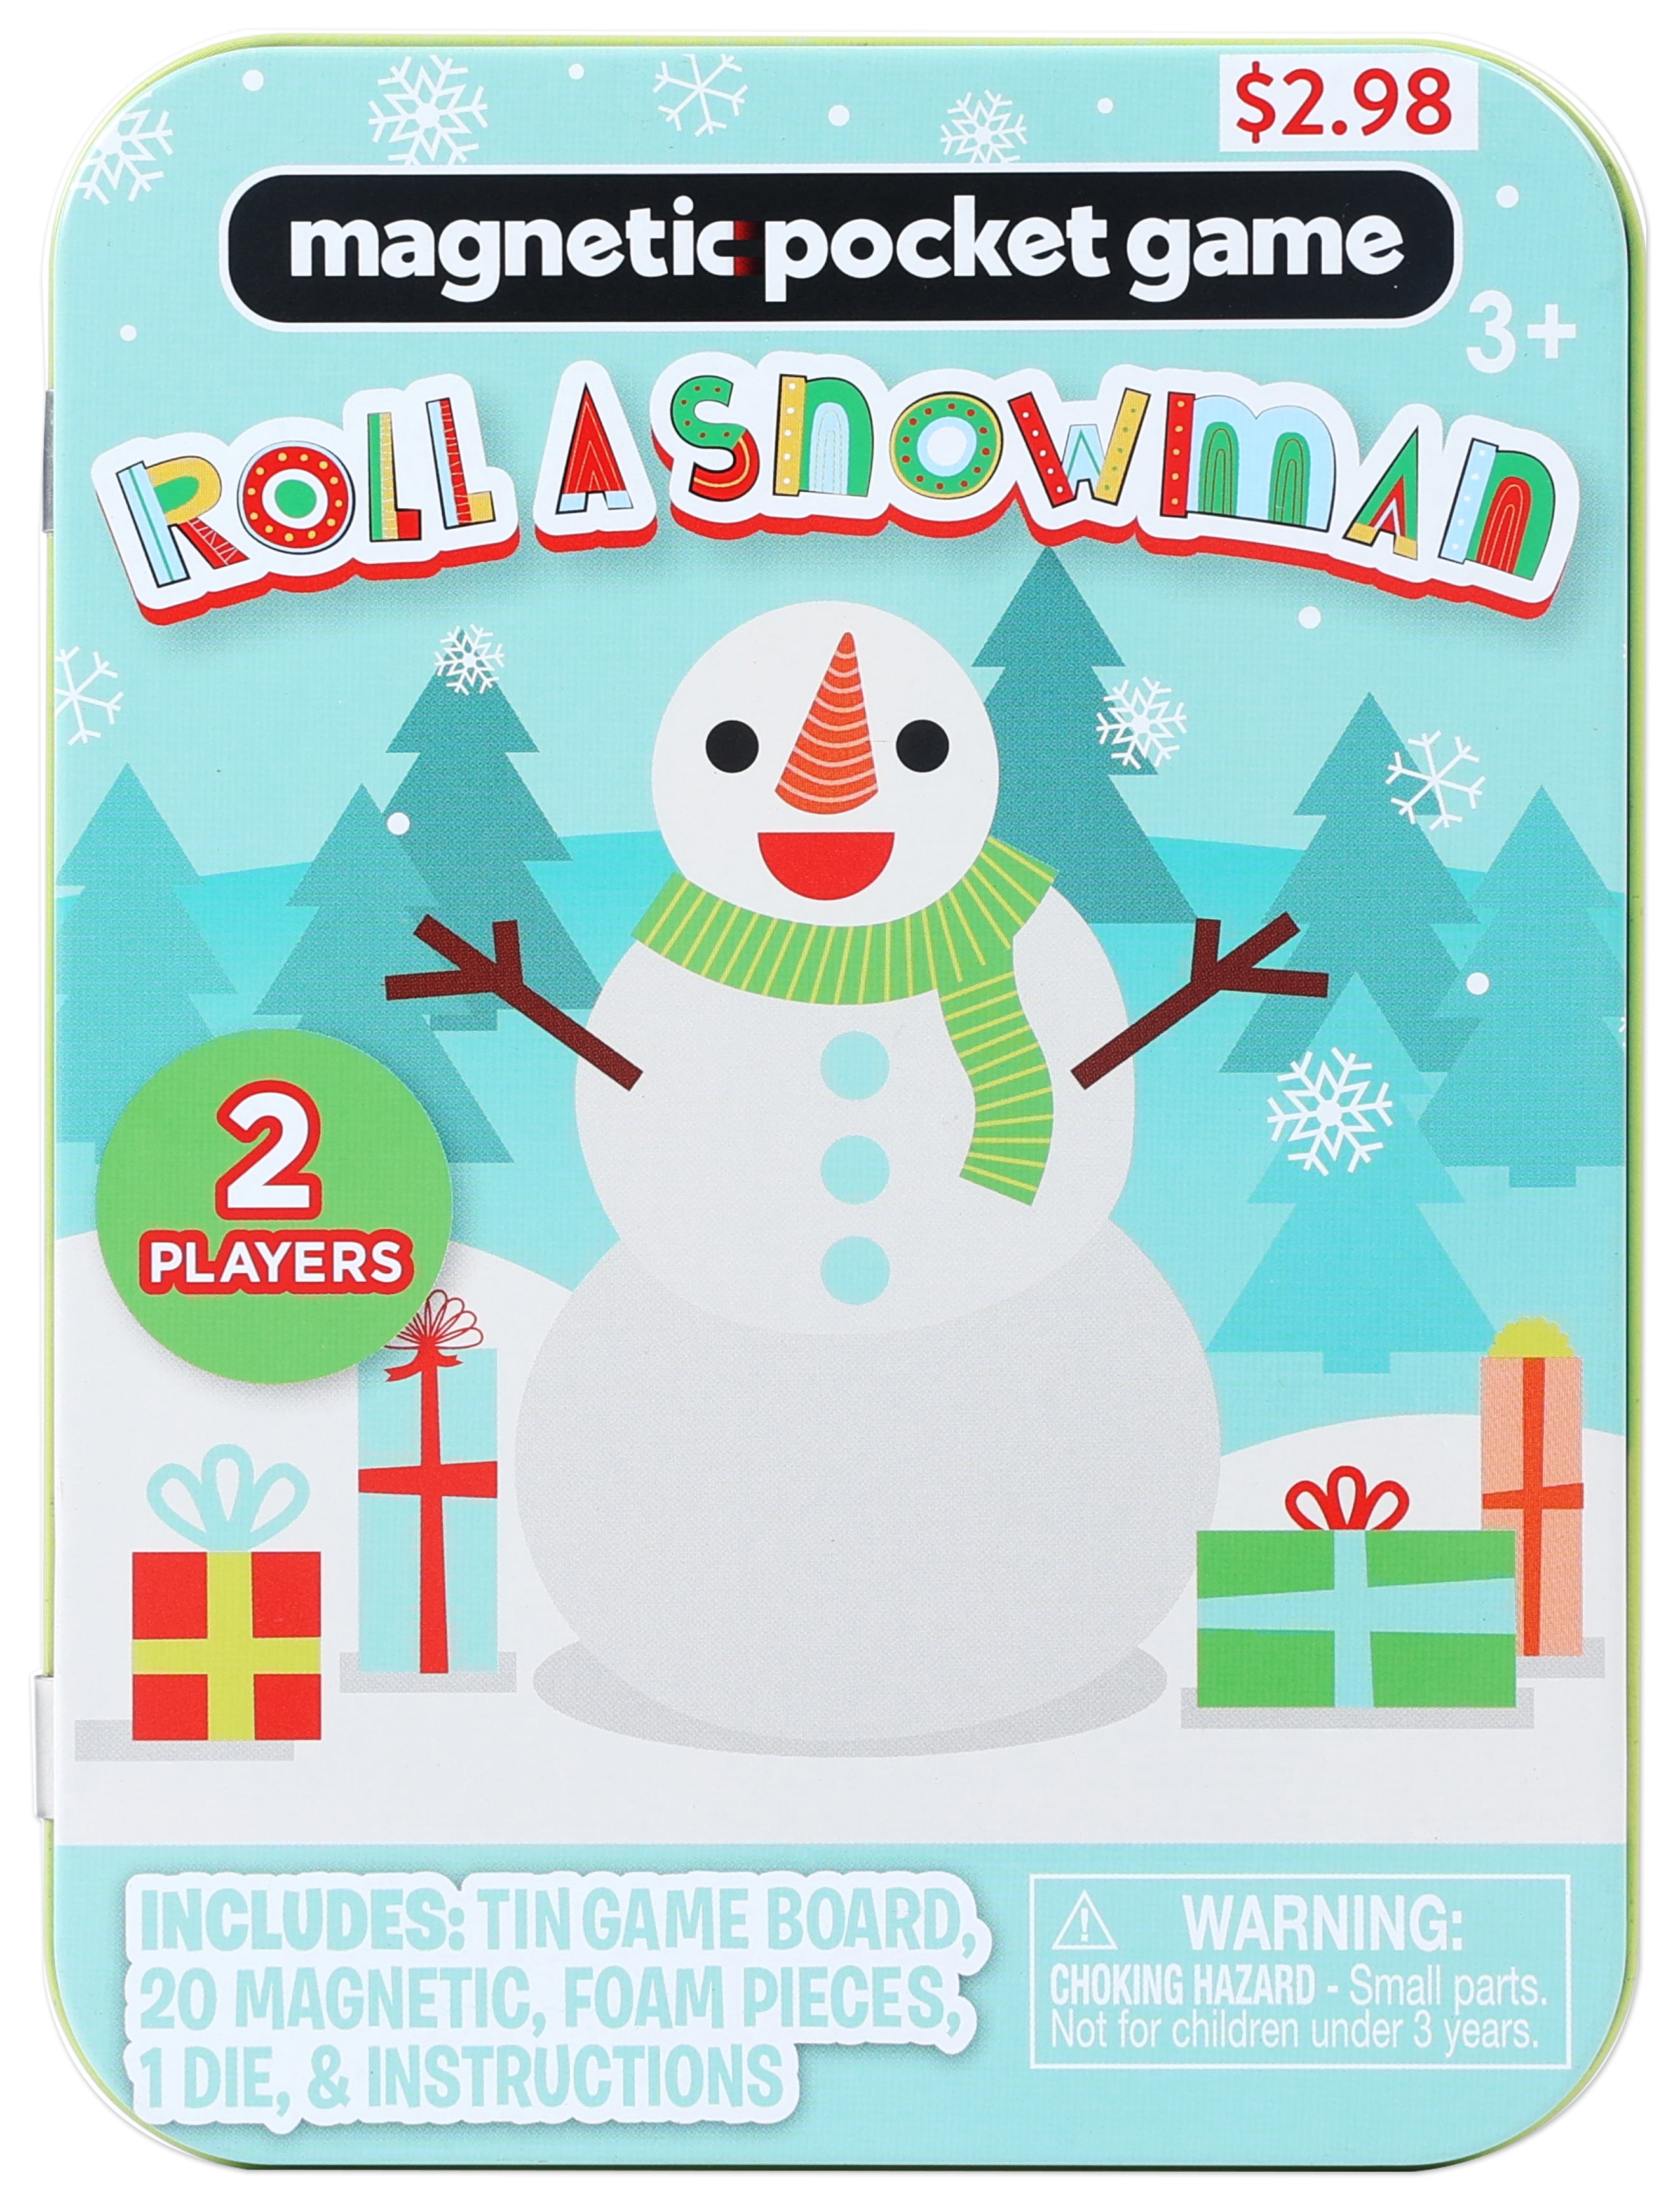 Magnetic Roll a Snowman Holiday Tin Game - Recommended for Ages 3 Years and up by WeVeel